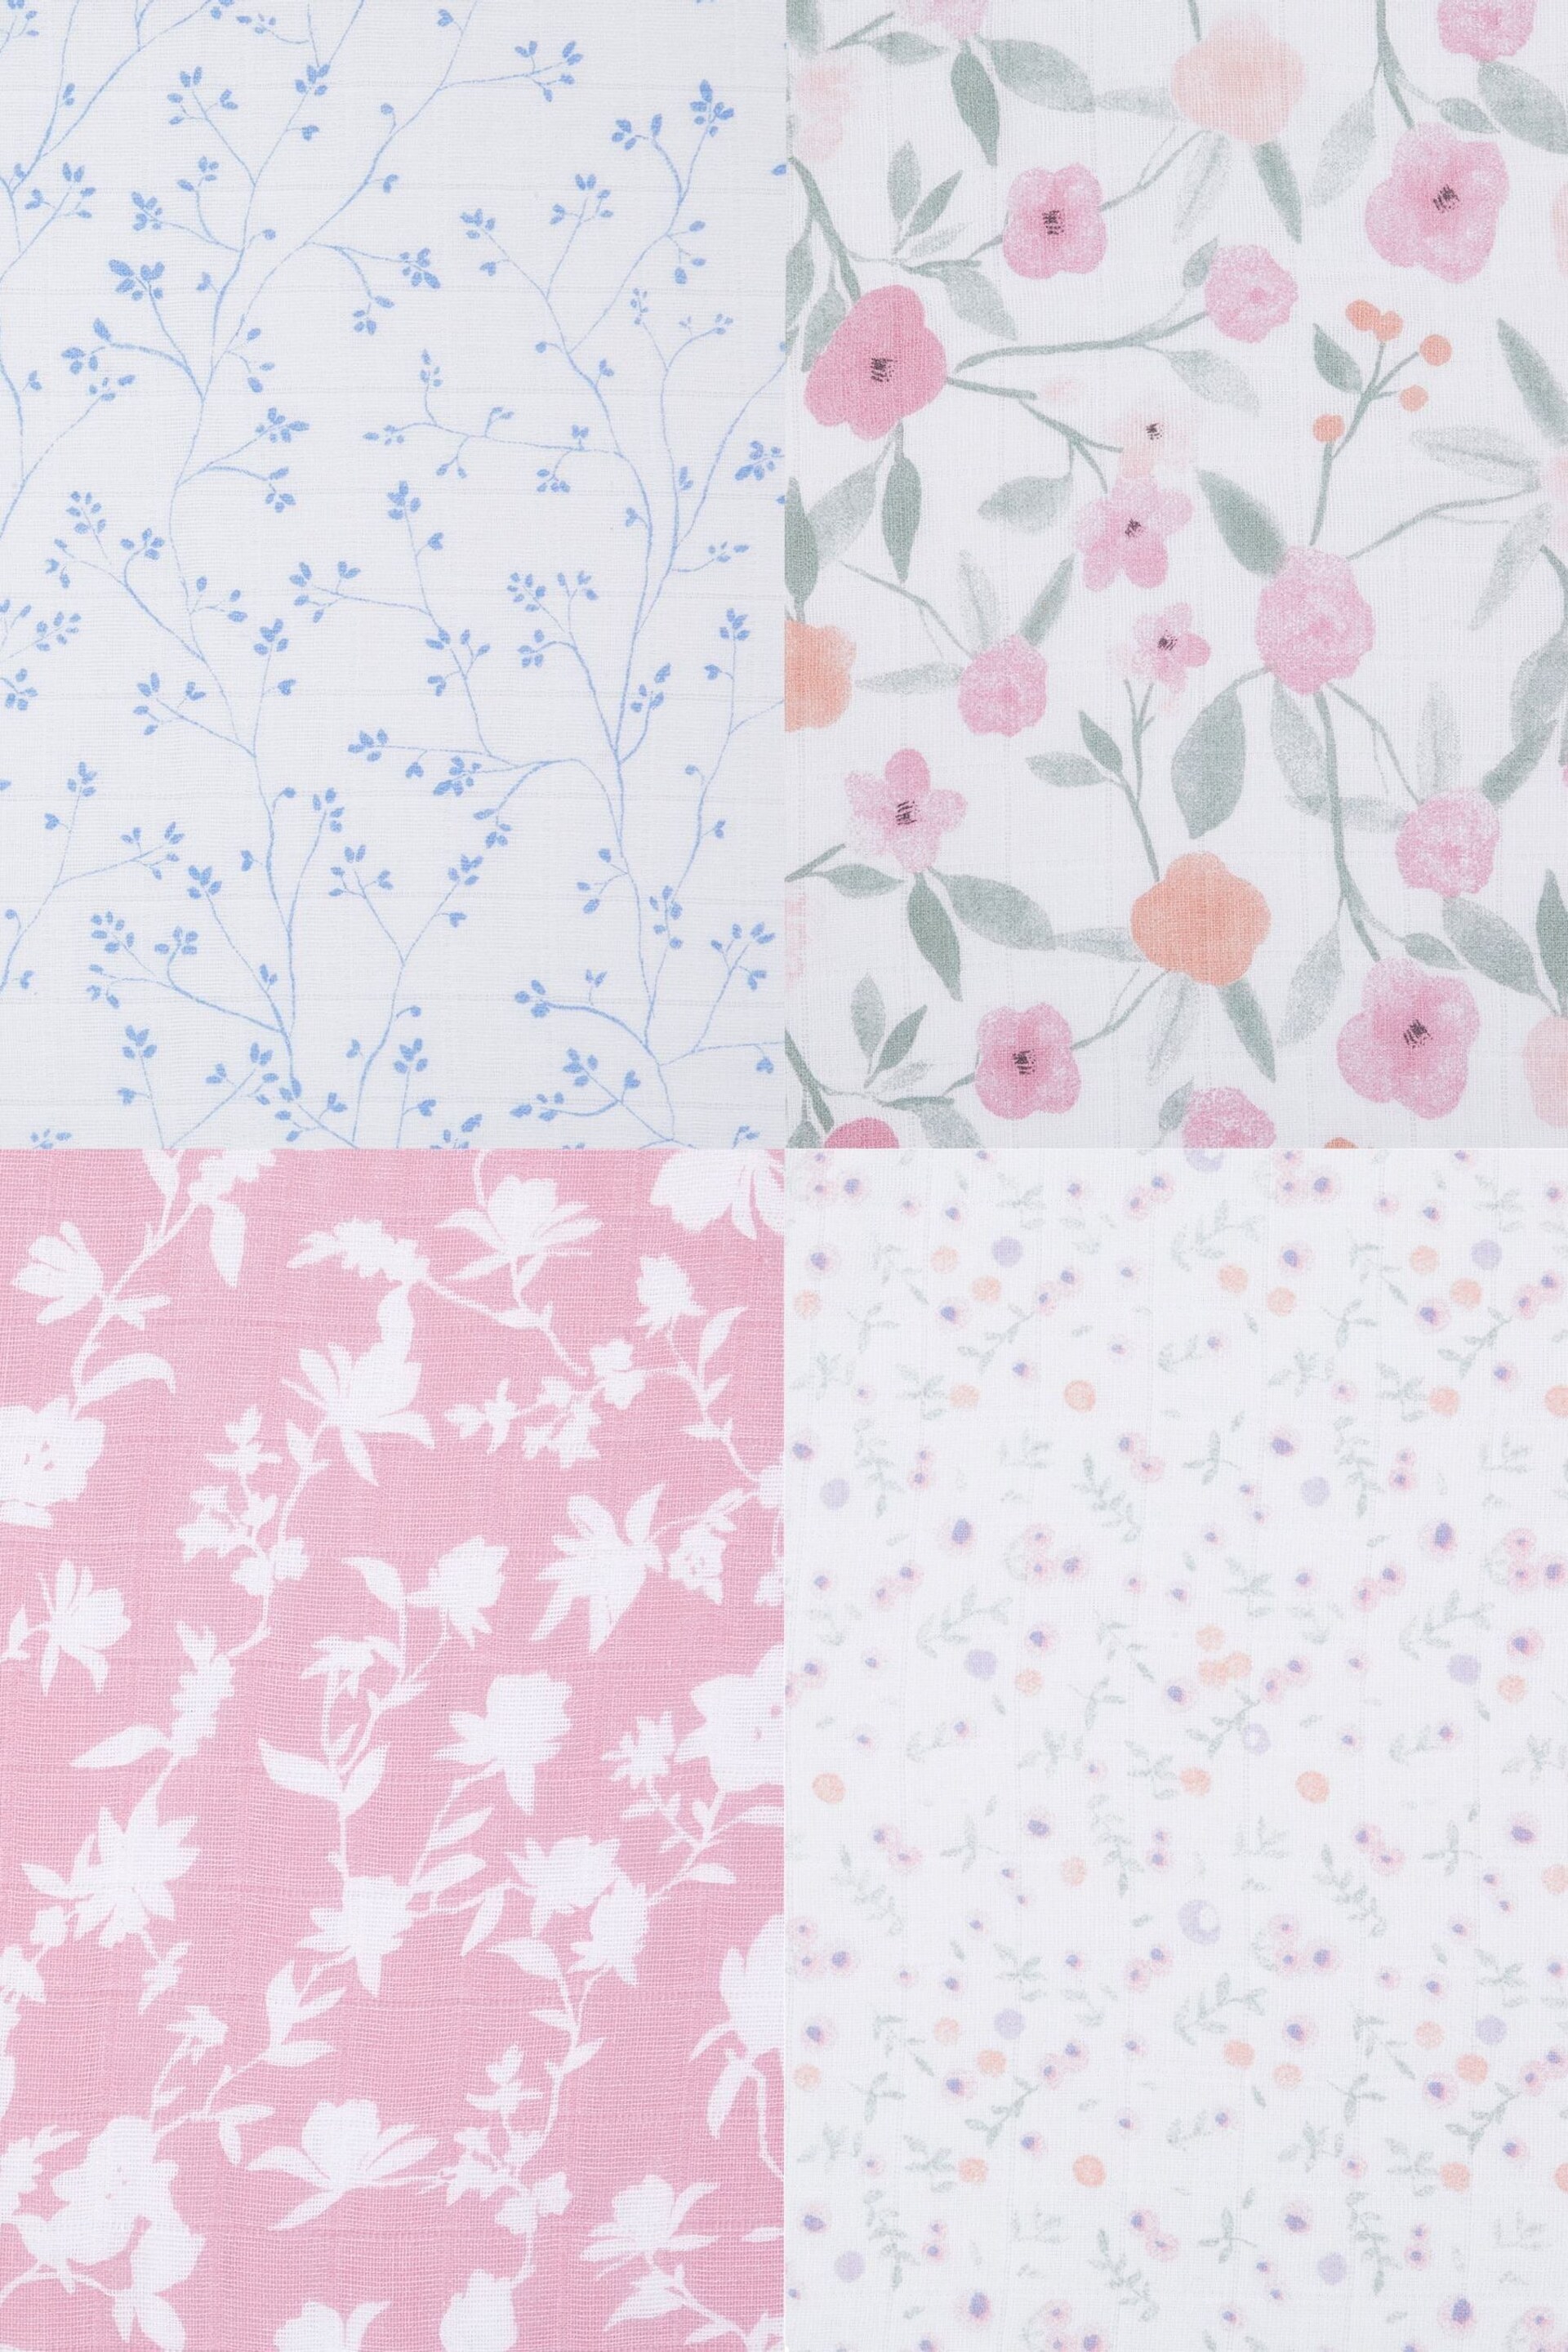 aden + anais ma fleur Large Cotton Muslin Blankets 4 Pack - Image 3 of 5